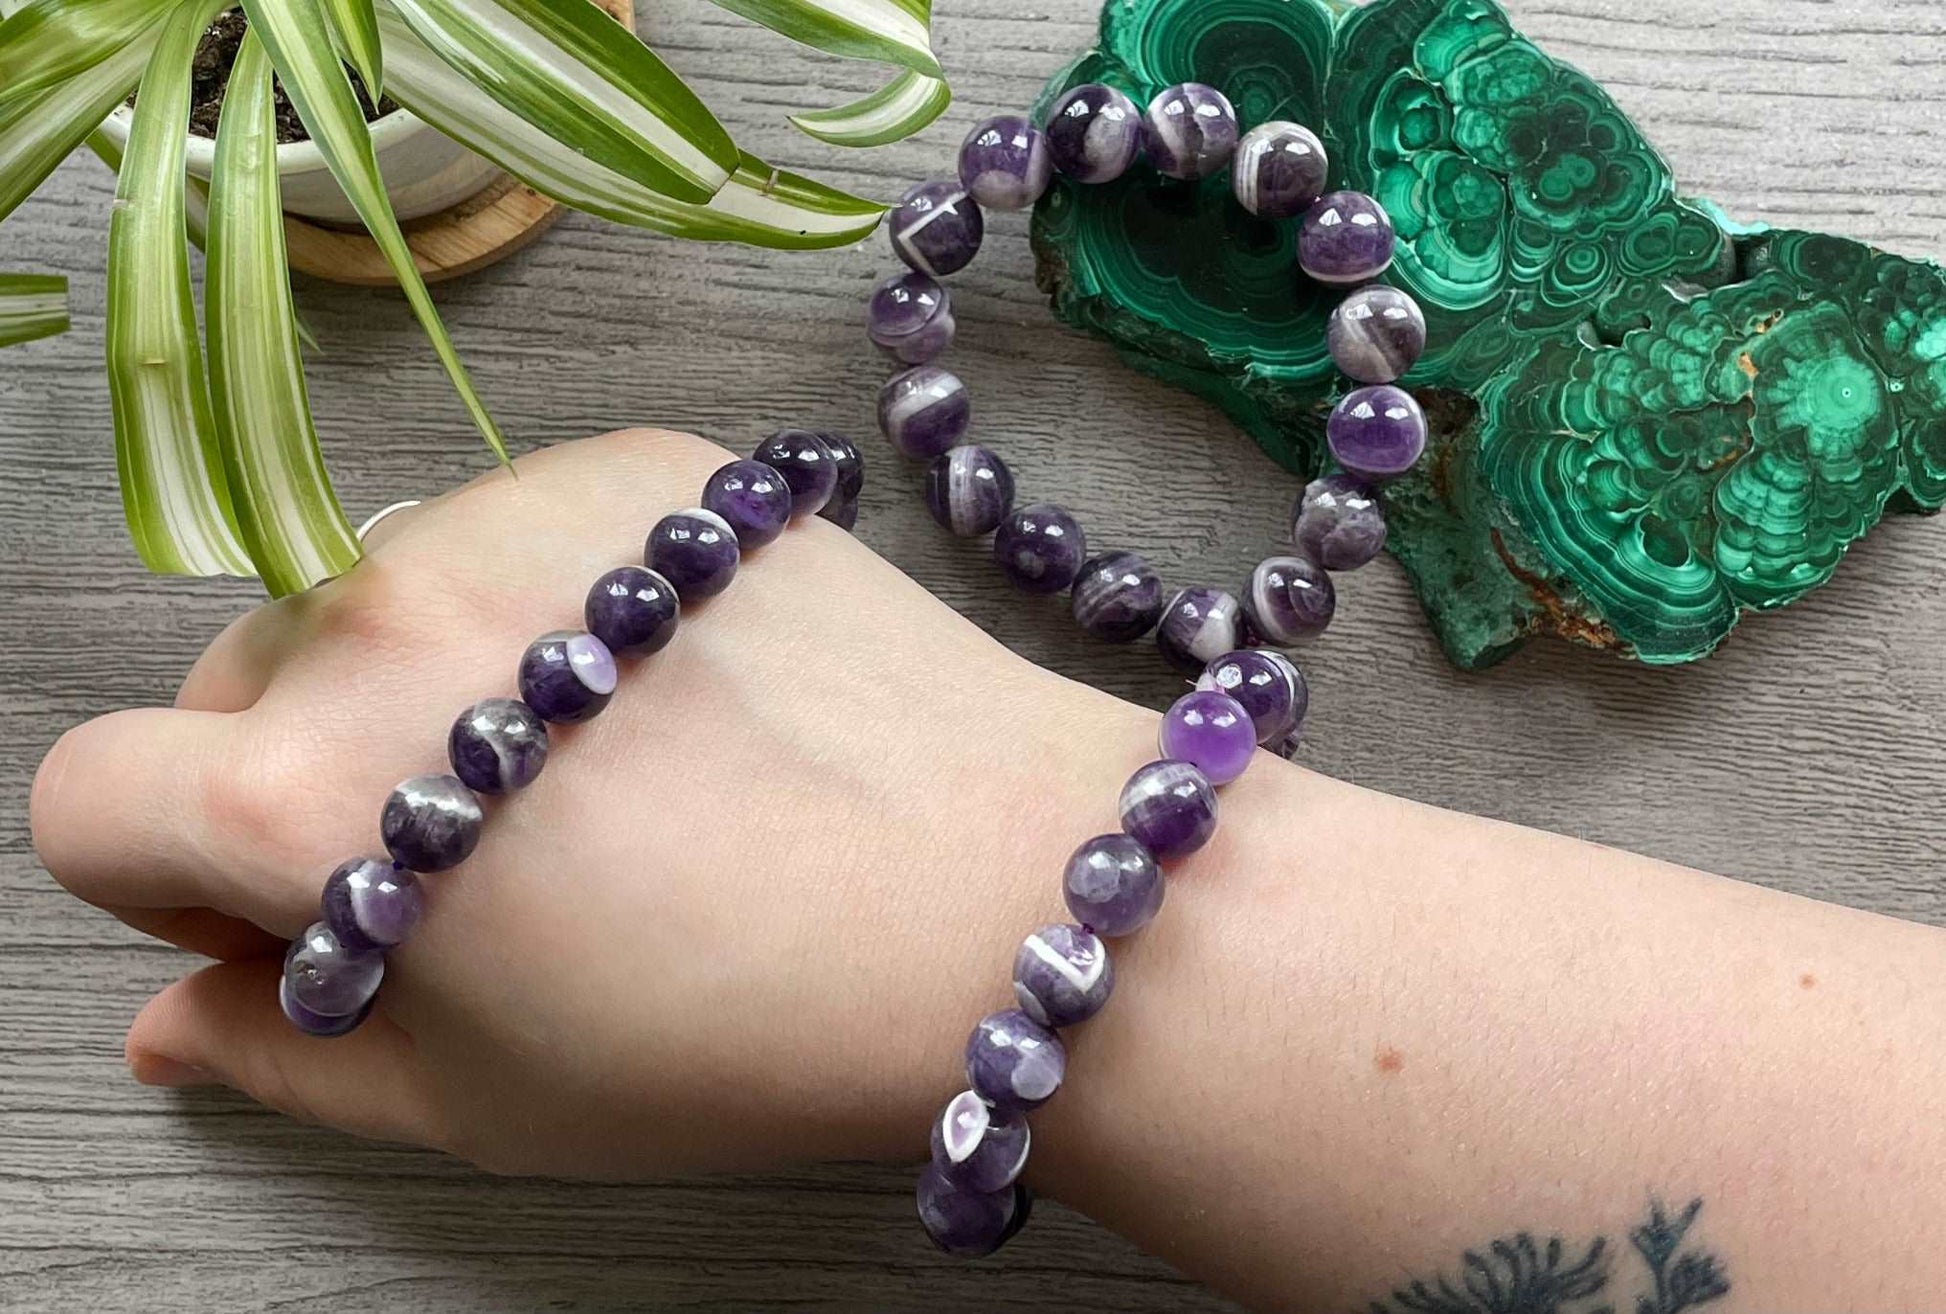 Pictured is a dream amethyst bead bracelet.